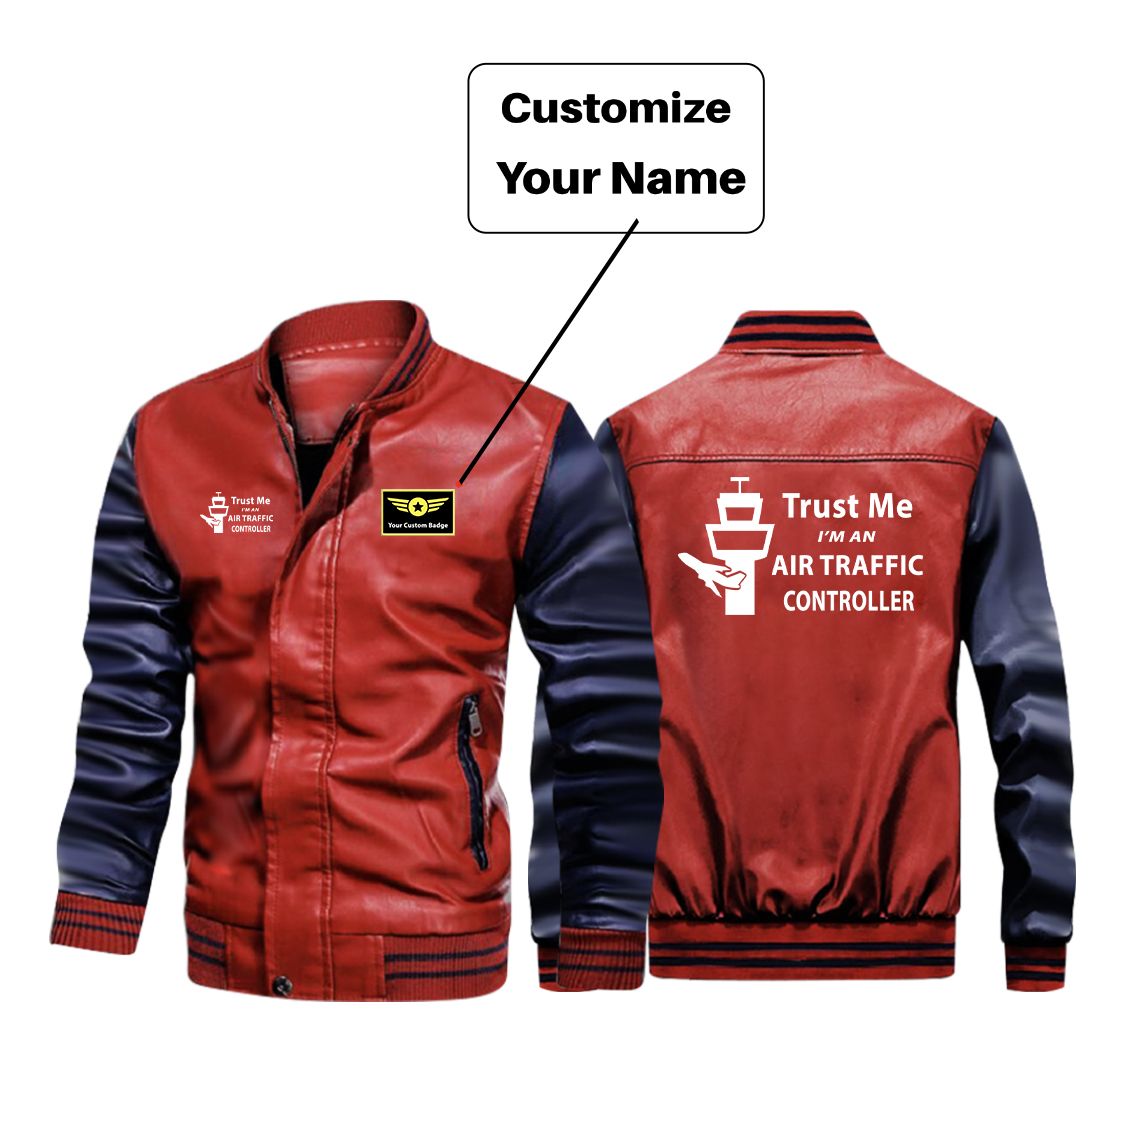 Trust Me I'm an Air Traffic Controller Designed Stylish Leather Bomber Jackets